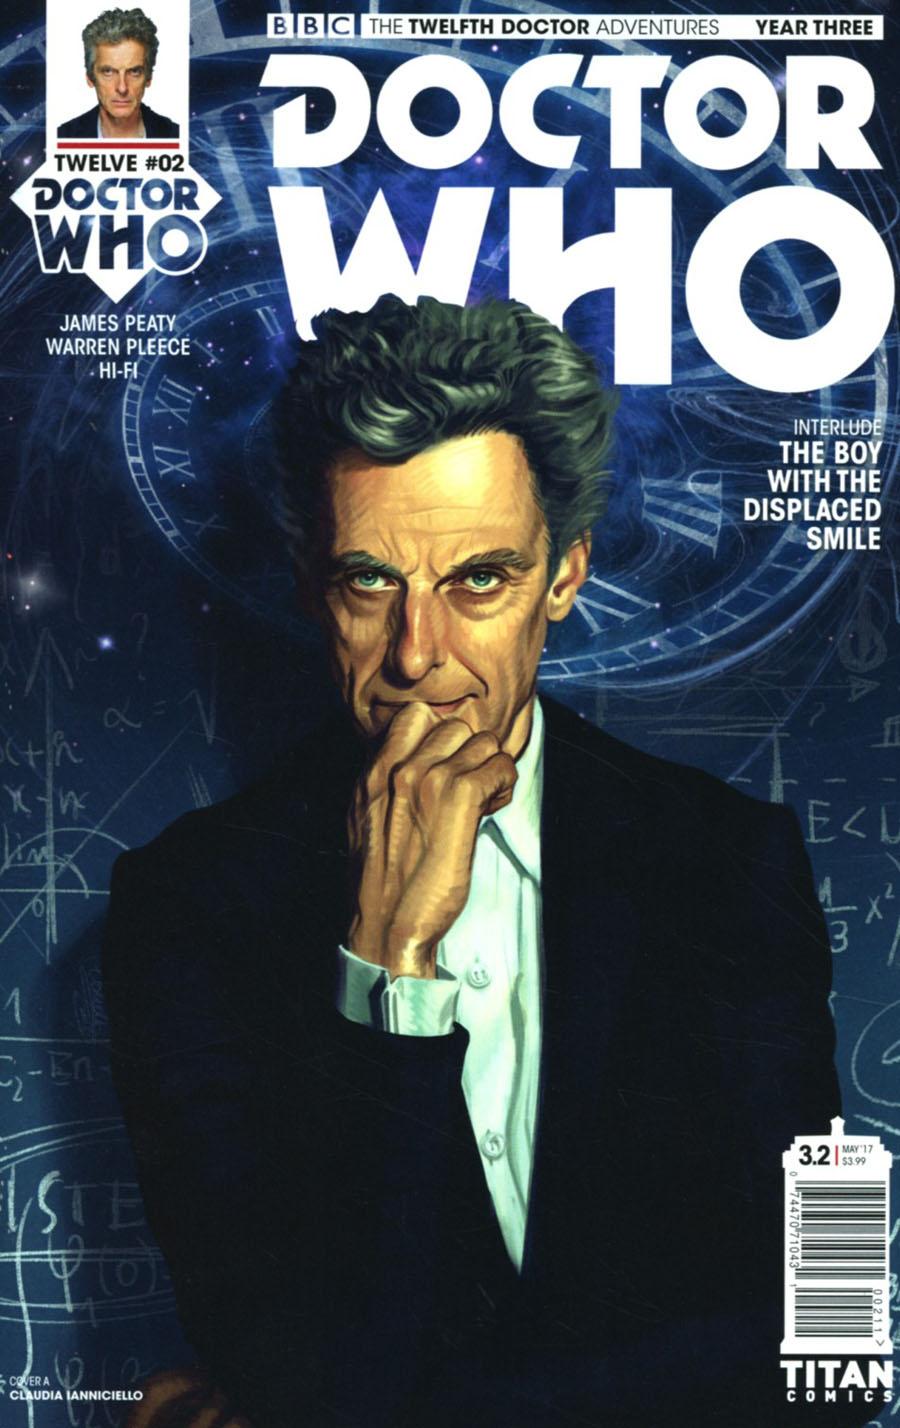 Doctor Who 12th Doctor Year Three Vol. 1 #2